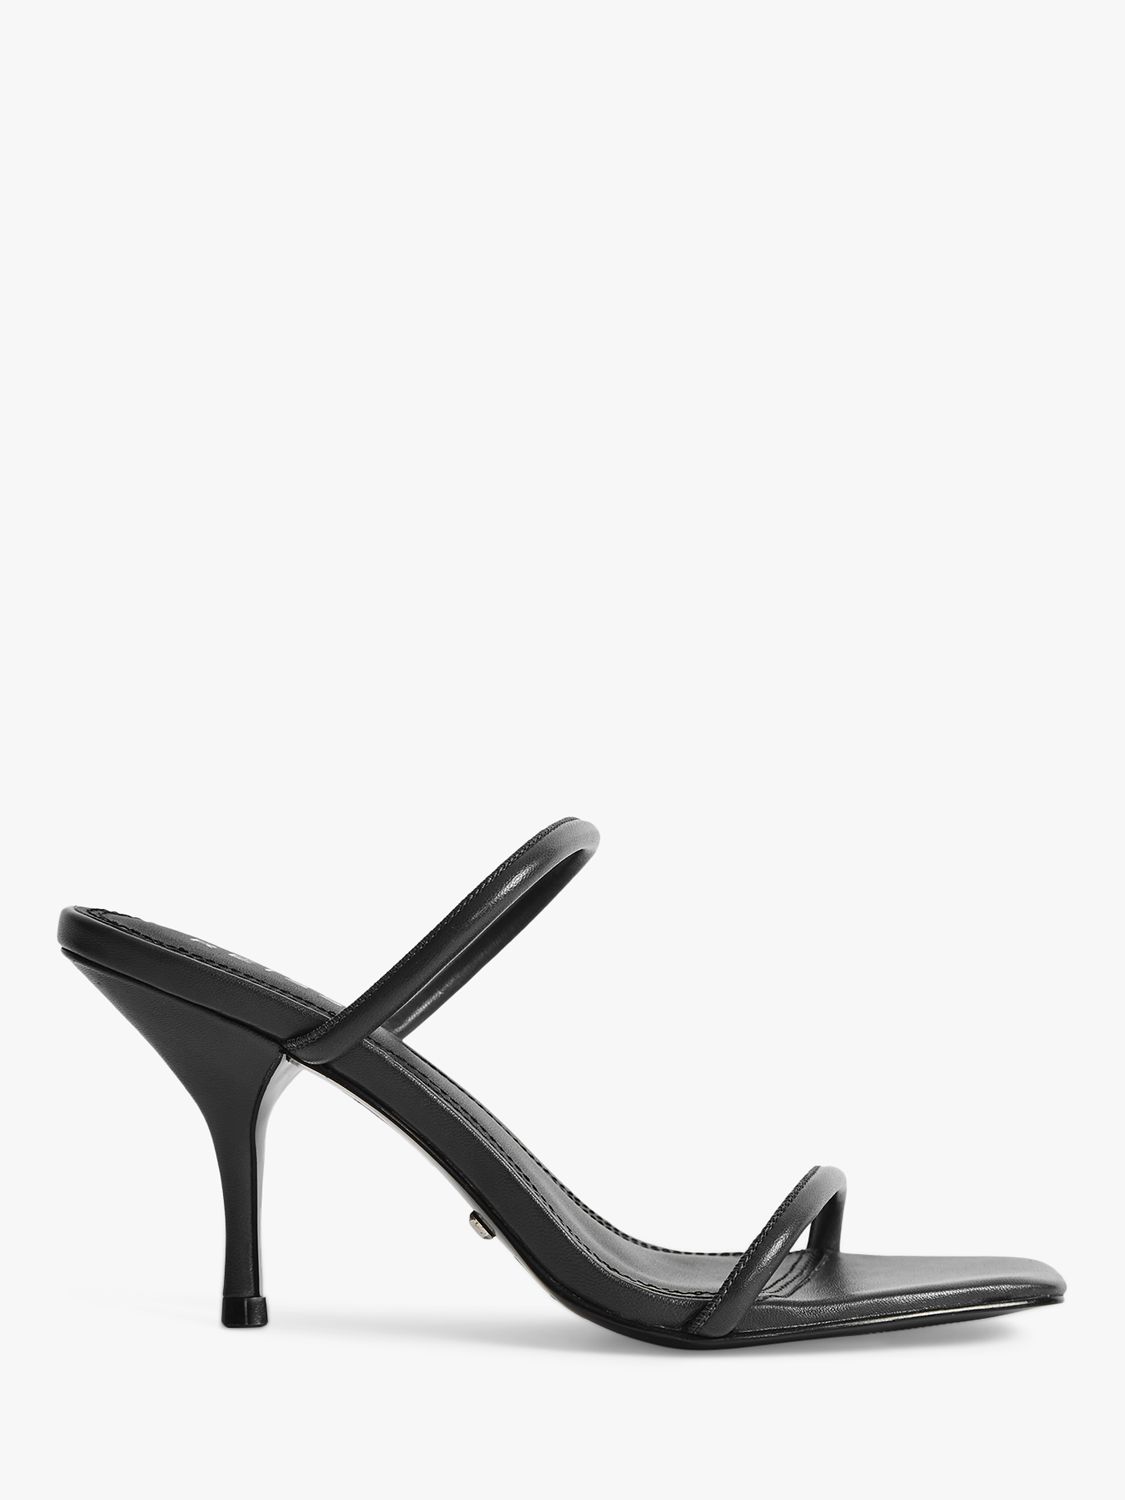 Reiss Magda Leather Strappy Heeled Sandals, Black at John Lewis & Partners